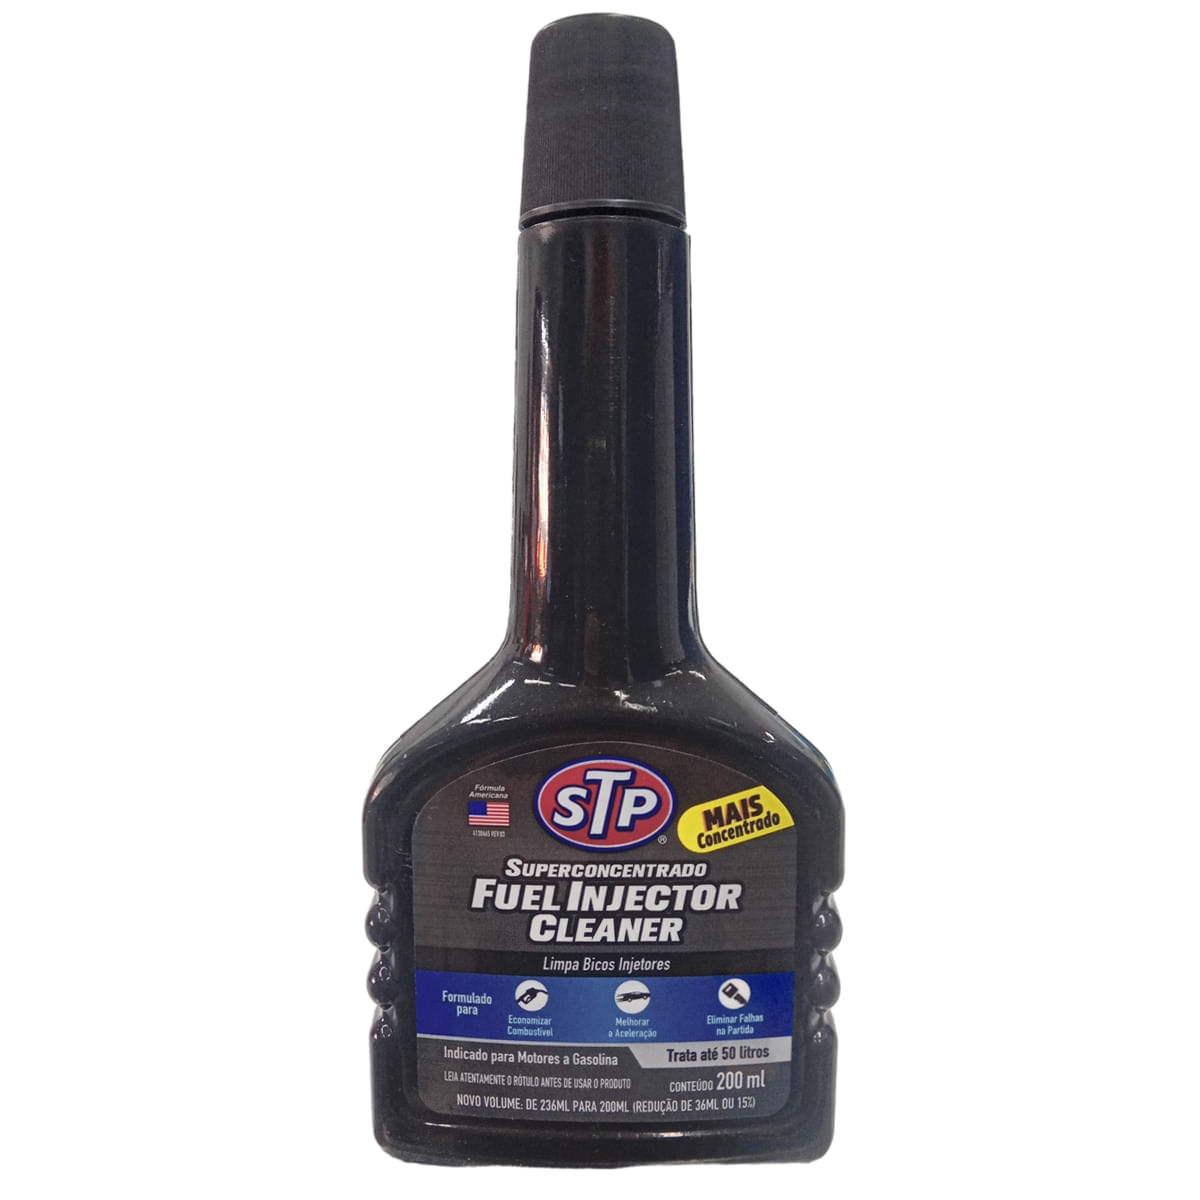 Aditivo Limpa Bicos Injetores STP Fuel Injector Cleaner 200ml